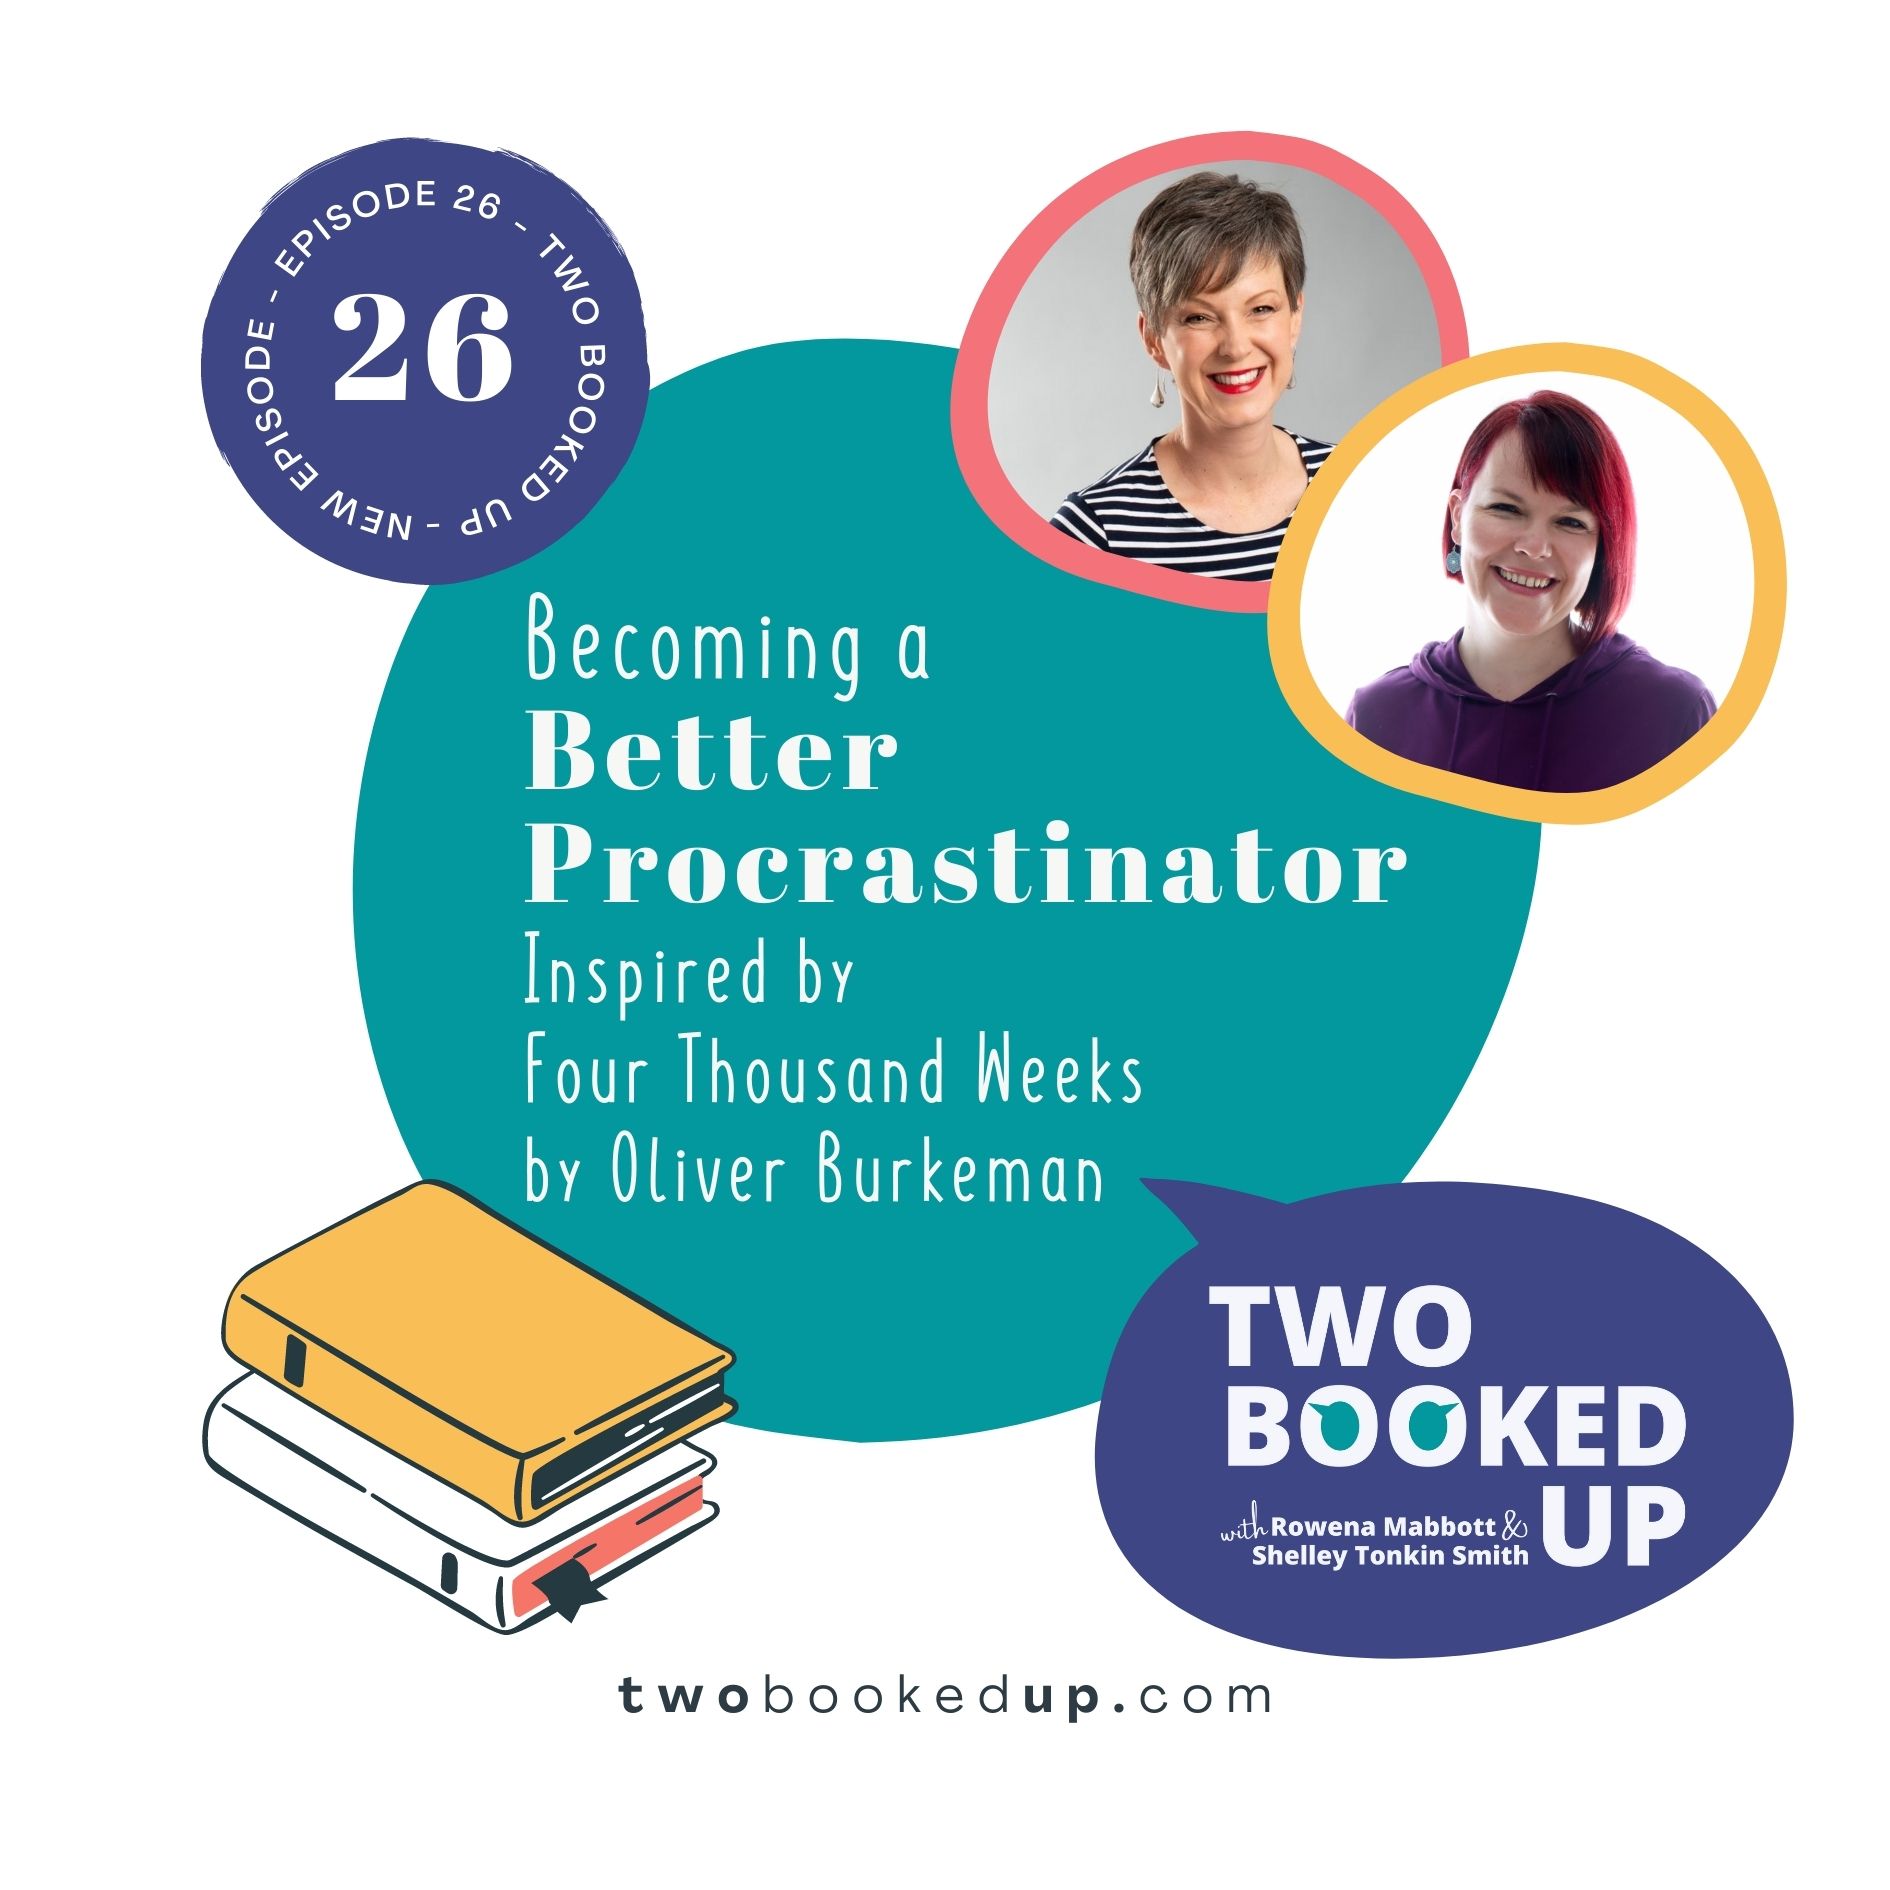 TBU#26 How to become a better procrastinator - inspired by Oliver Burkeman's Four Thousand Weeks